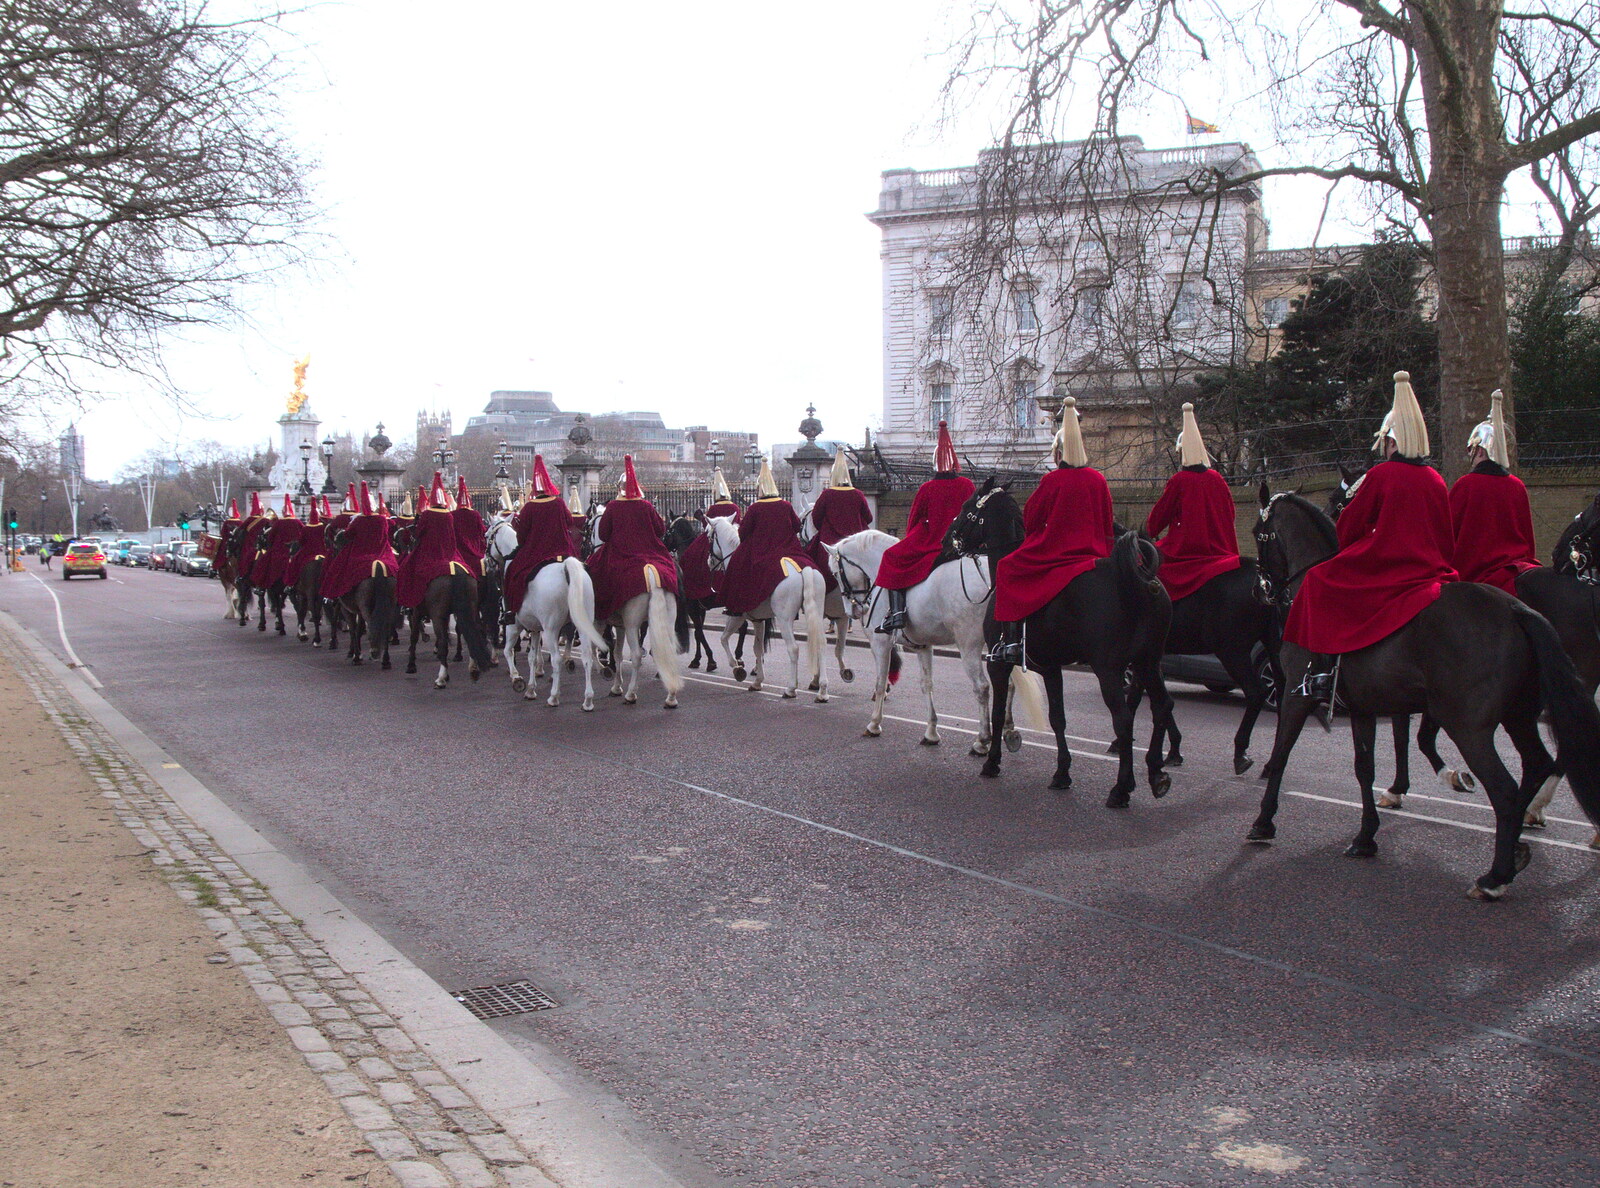 Snowmageddon: The Beast From the East, Suffolk and London - 27th February 2018: The marching band heads off past Buckingham Palace